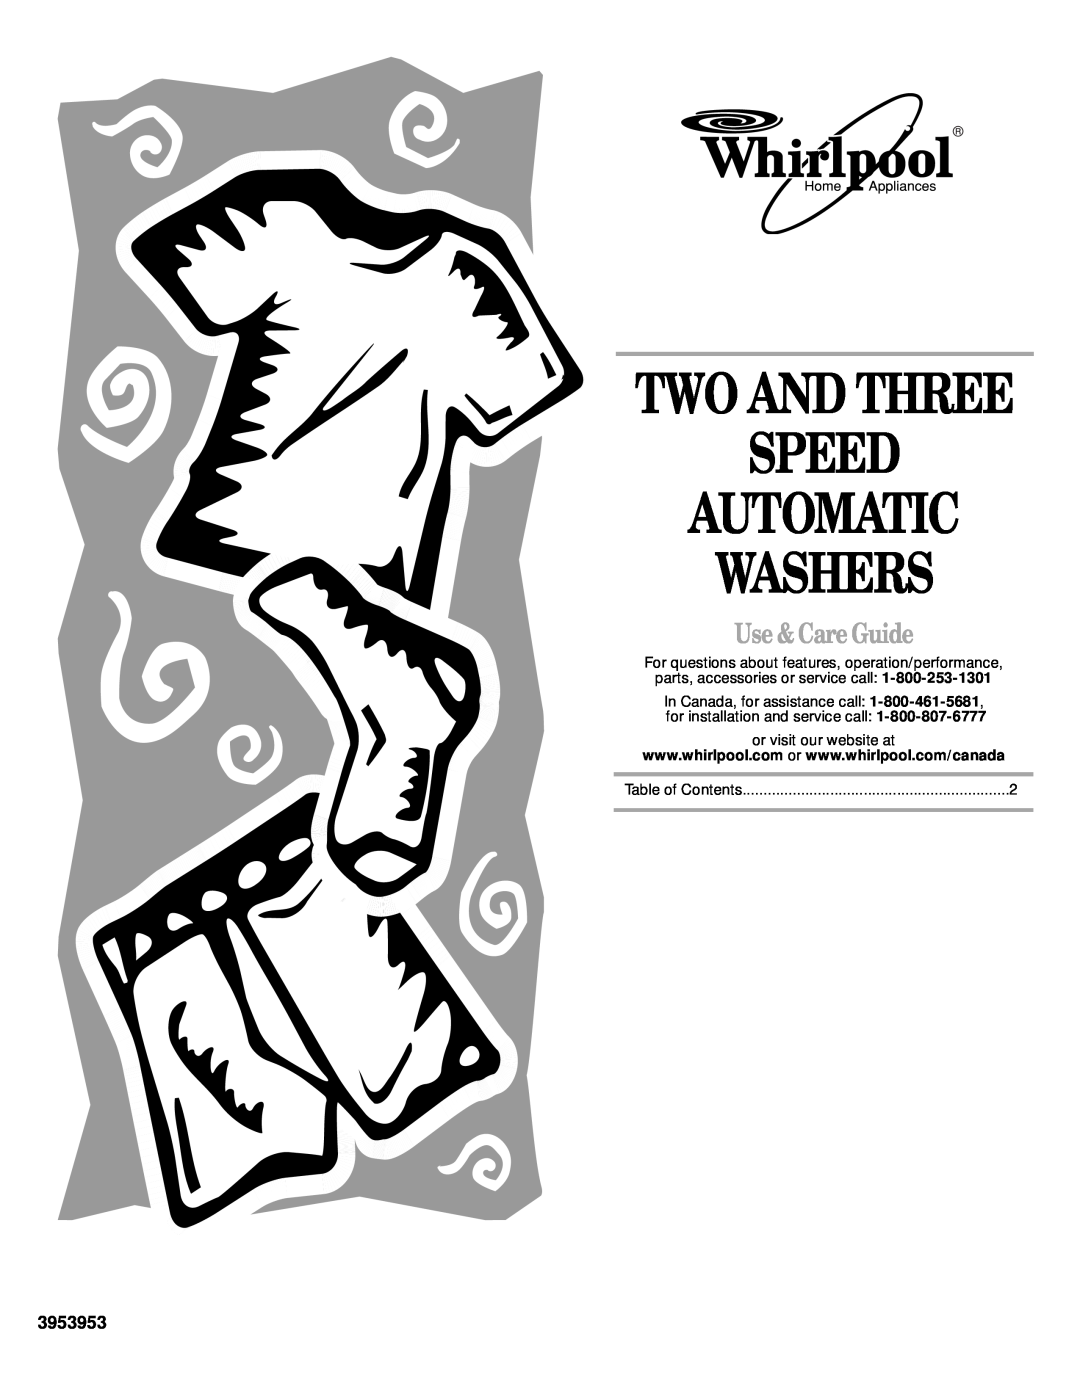 Whirlpool 3953953 manual Use & Care Guide, Two And Three Speed Automatic Washers 